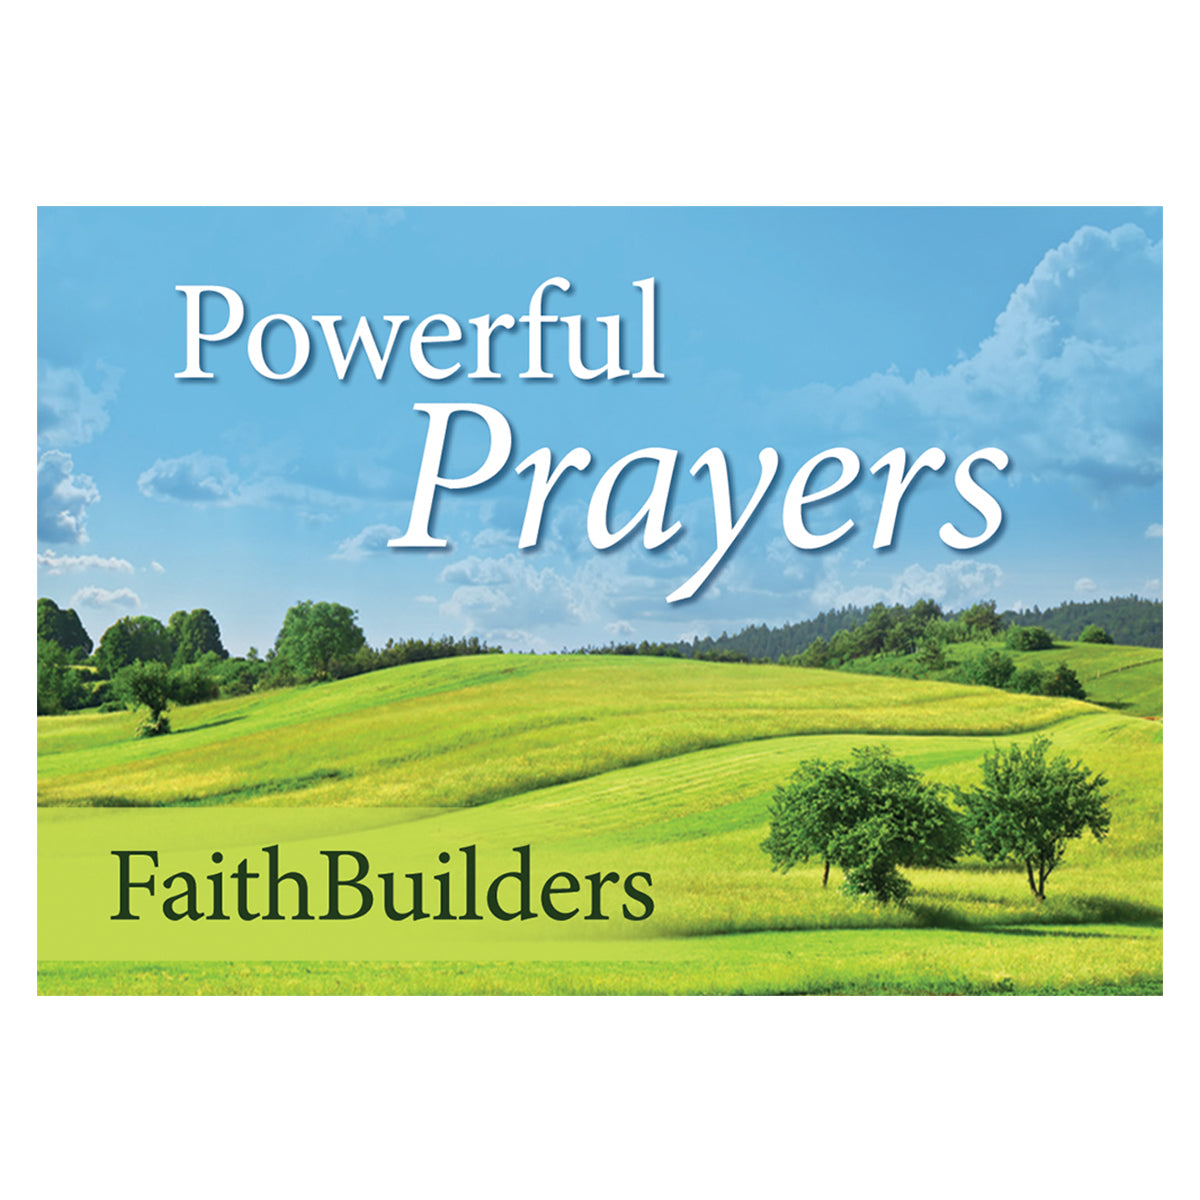 Image of Powerful Prayers Faithbuilders other